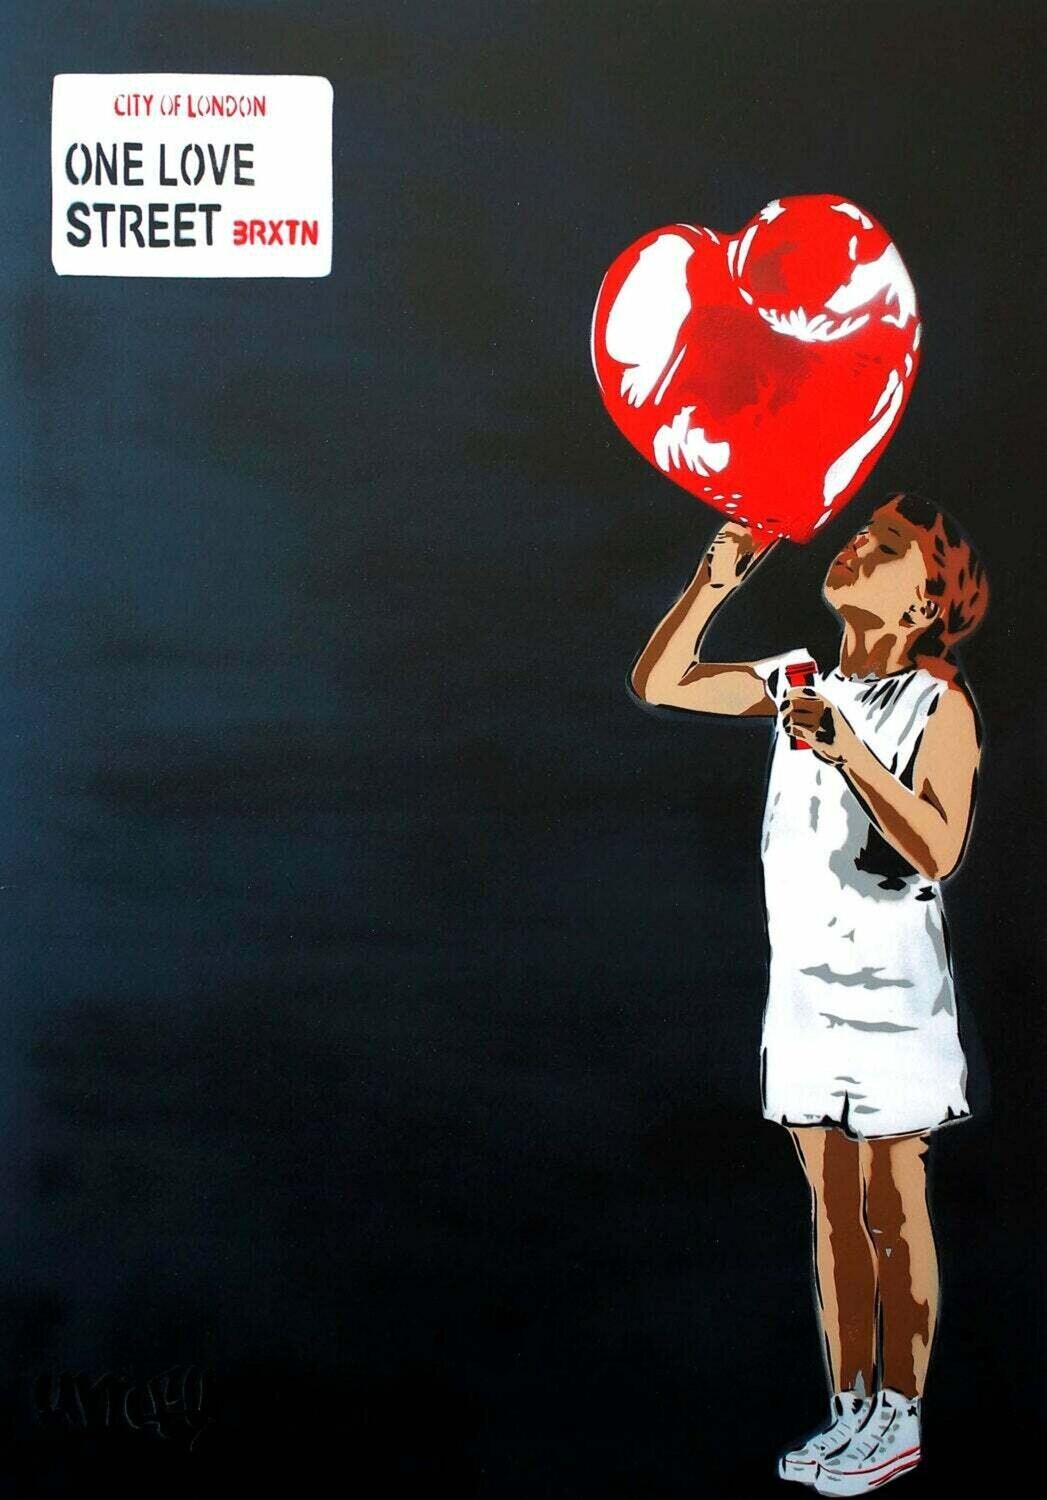 One Love Bubble Girl, Brxton - Limited Edition (Previously Framed) On Black Board